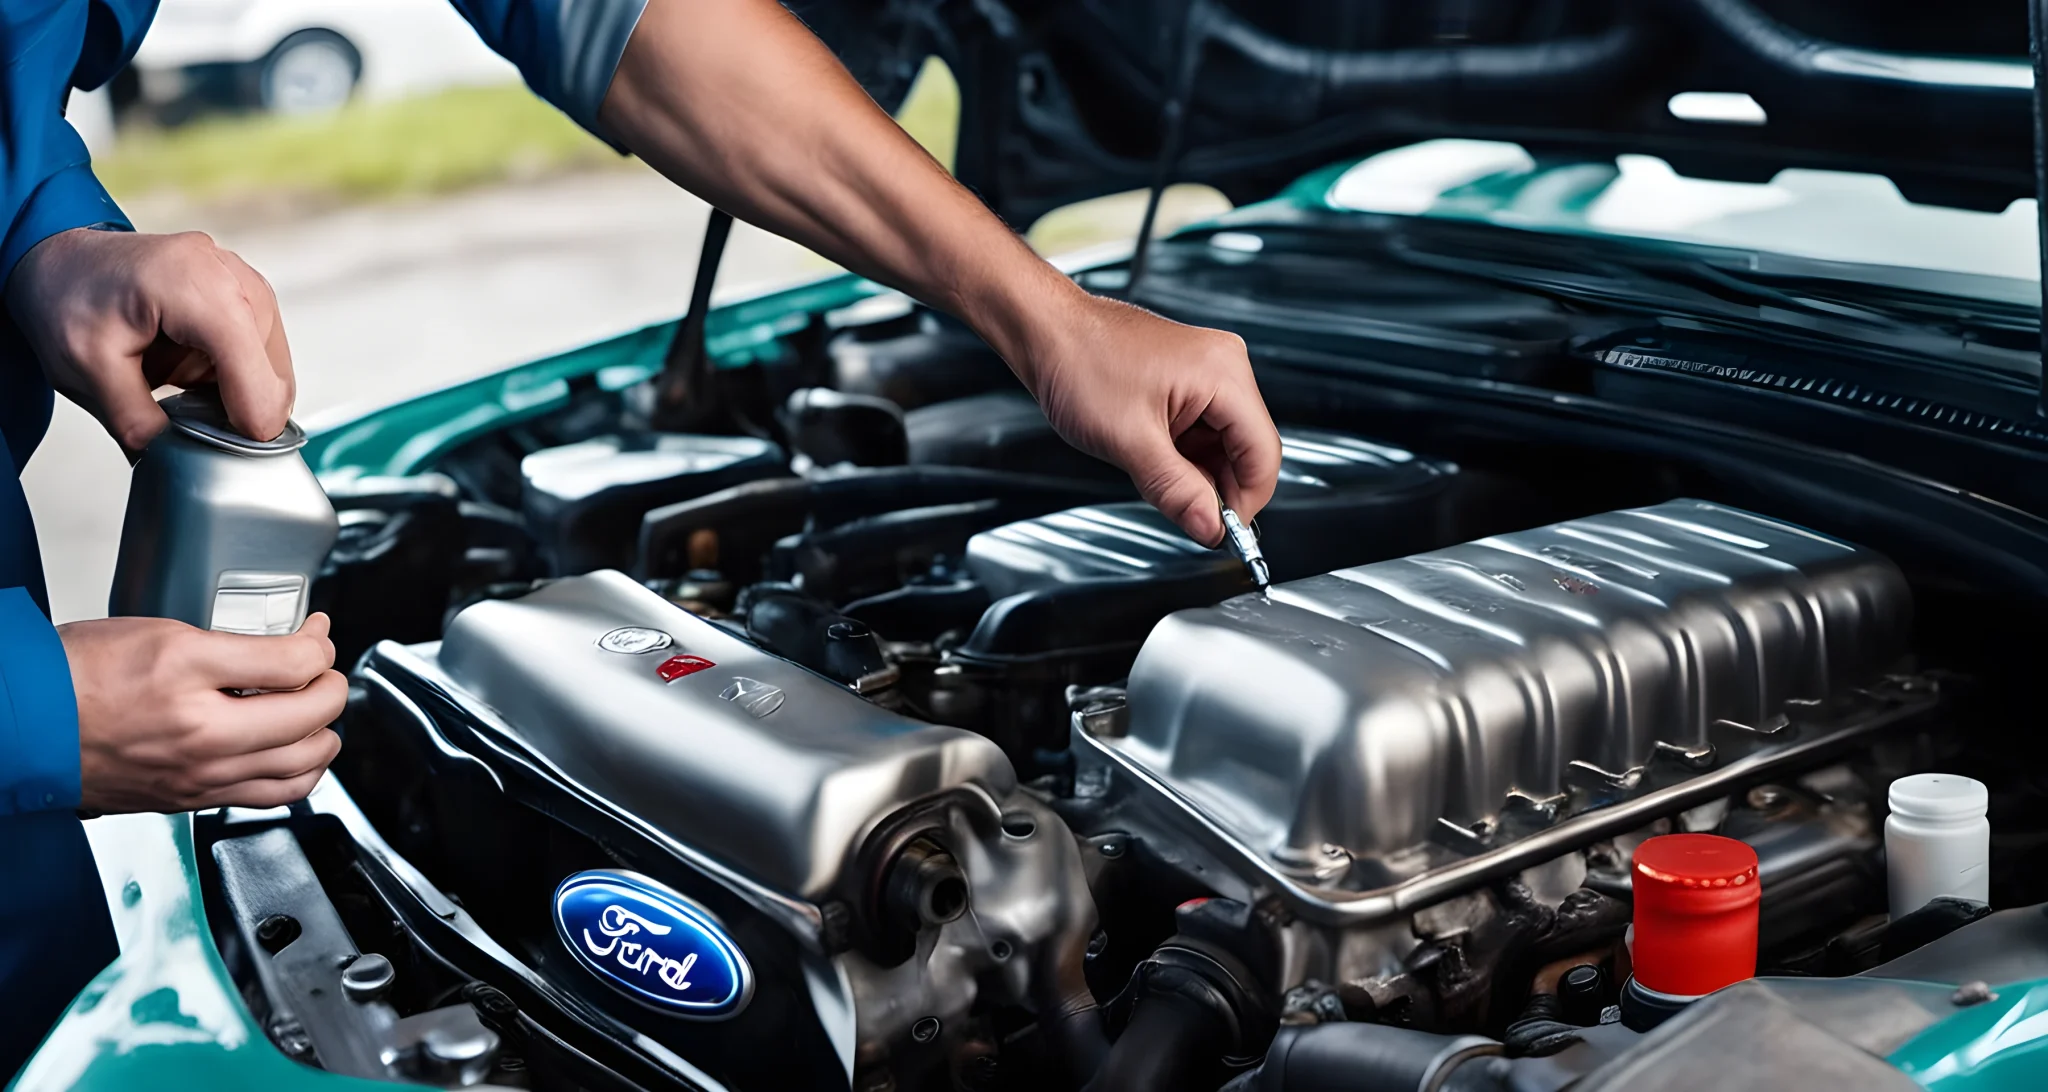 The image shows a person checking the oil and coolant levels in a Ford car engine.